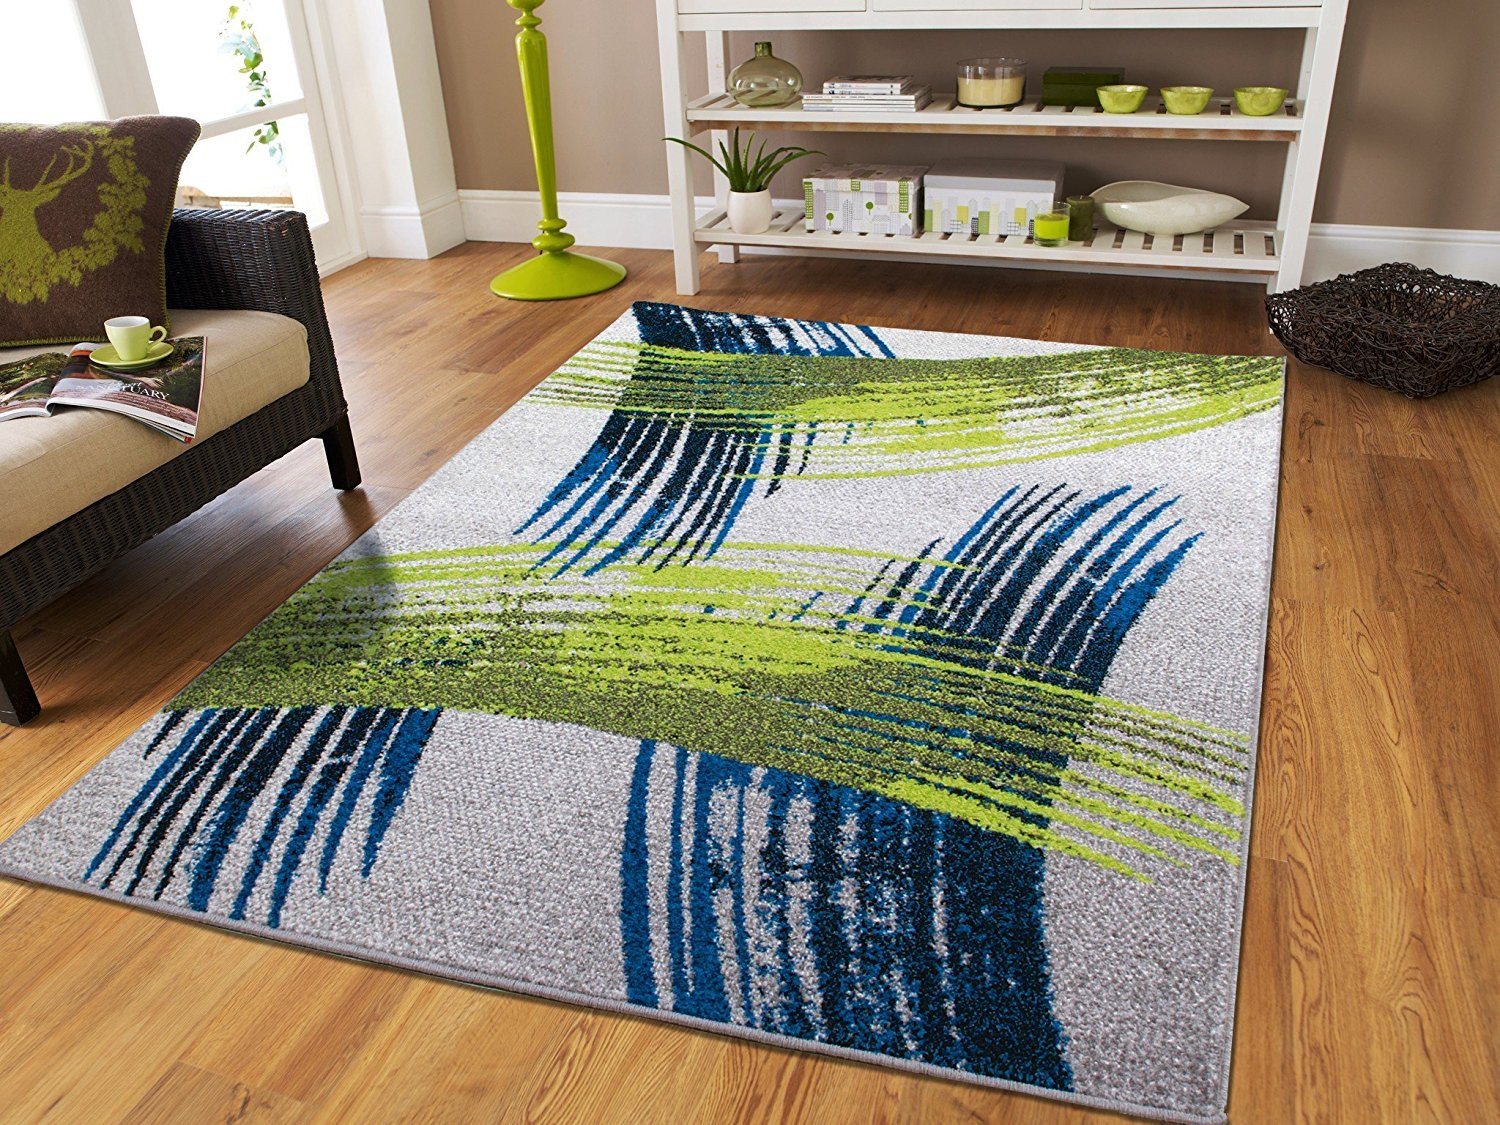 Green Rugs For Living Room
 Area Rugs on Clearance Small Rugs for under $20 2x3 Green